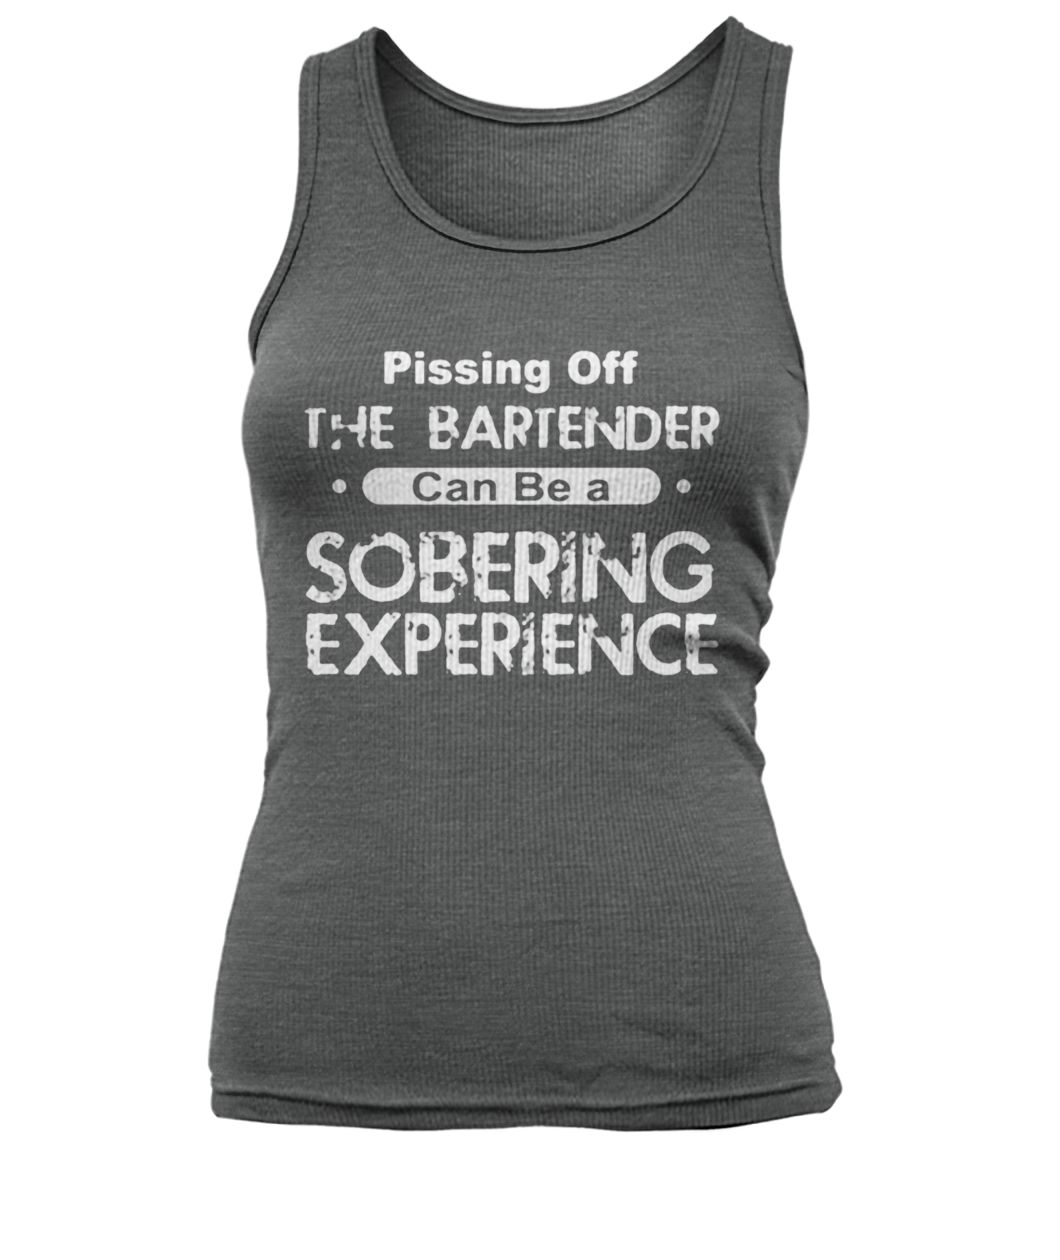 Pissing off the bartender can be a soberring experience women's tank top